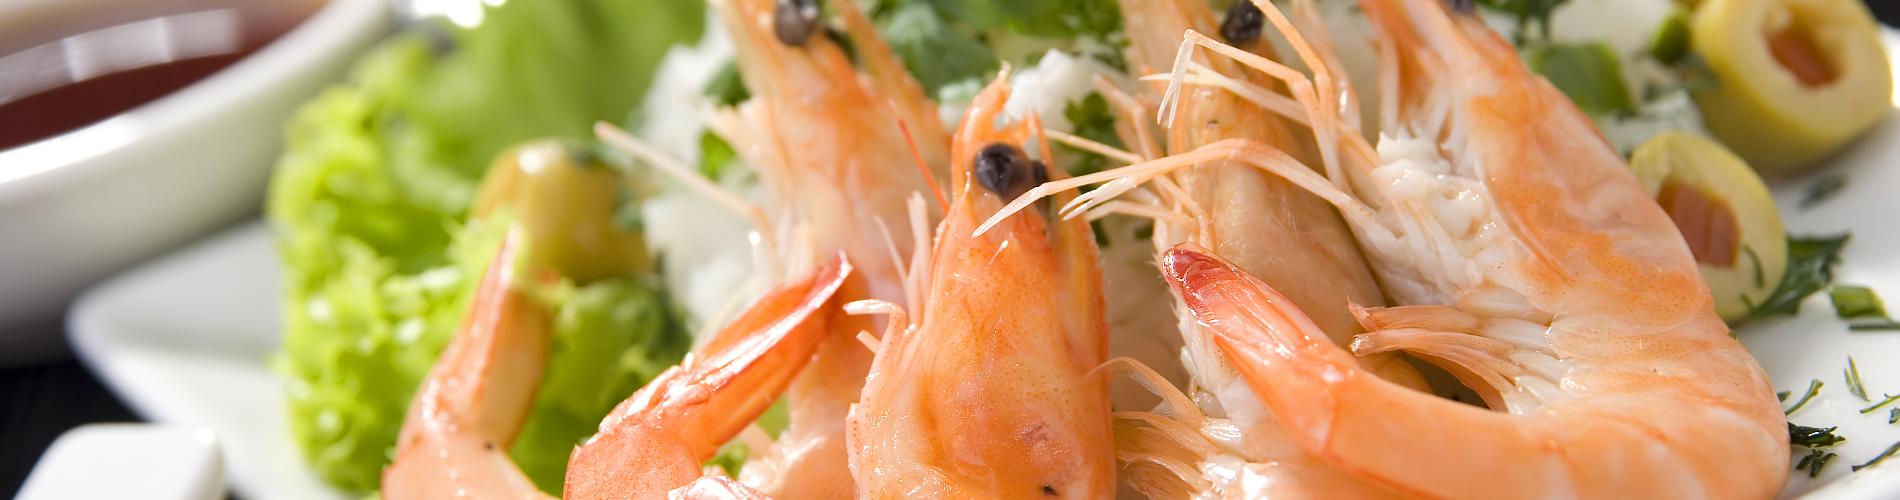 When Considering Healthy Meal Choices Don’t Skip the Shrimp (With Recipe)